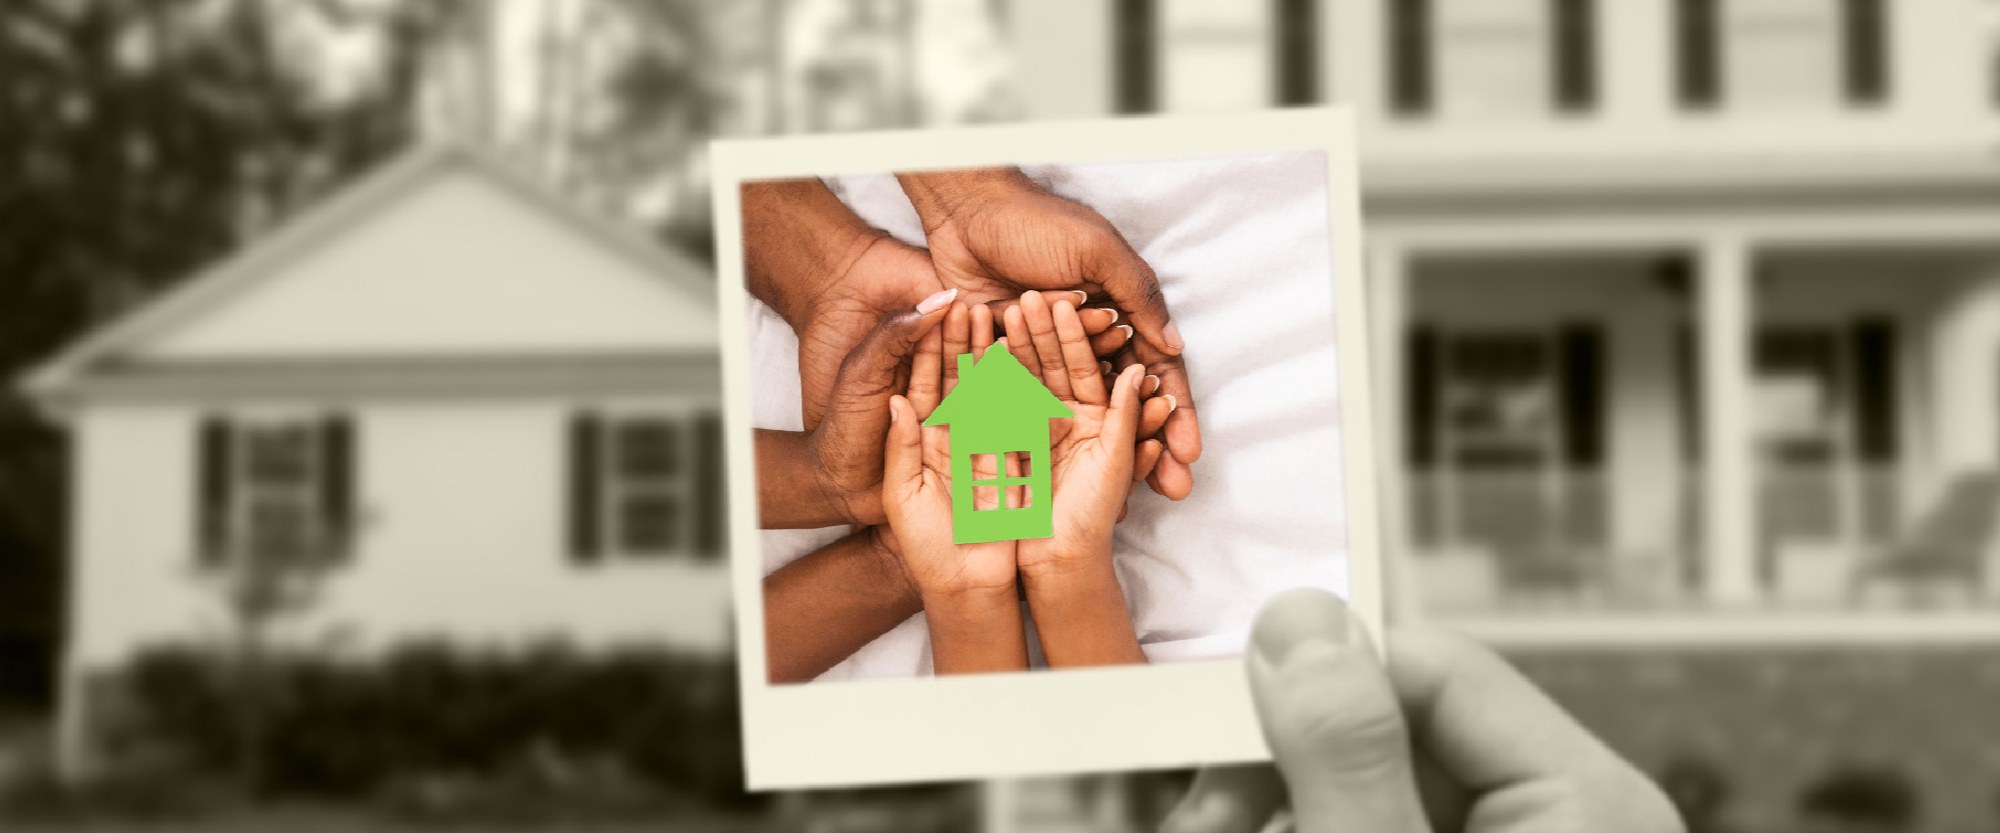 family set of hands holding a green cutout house in a polaroid being held in front of a house